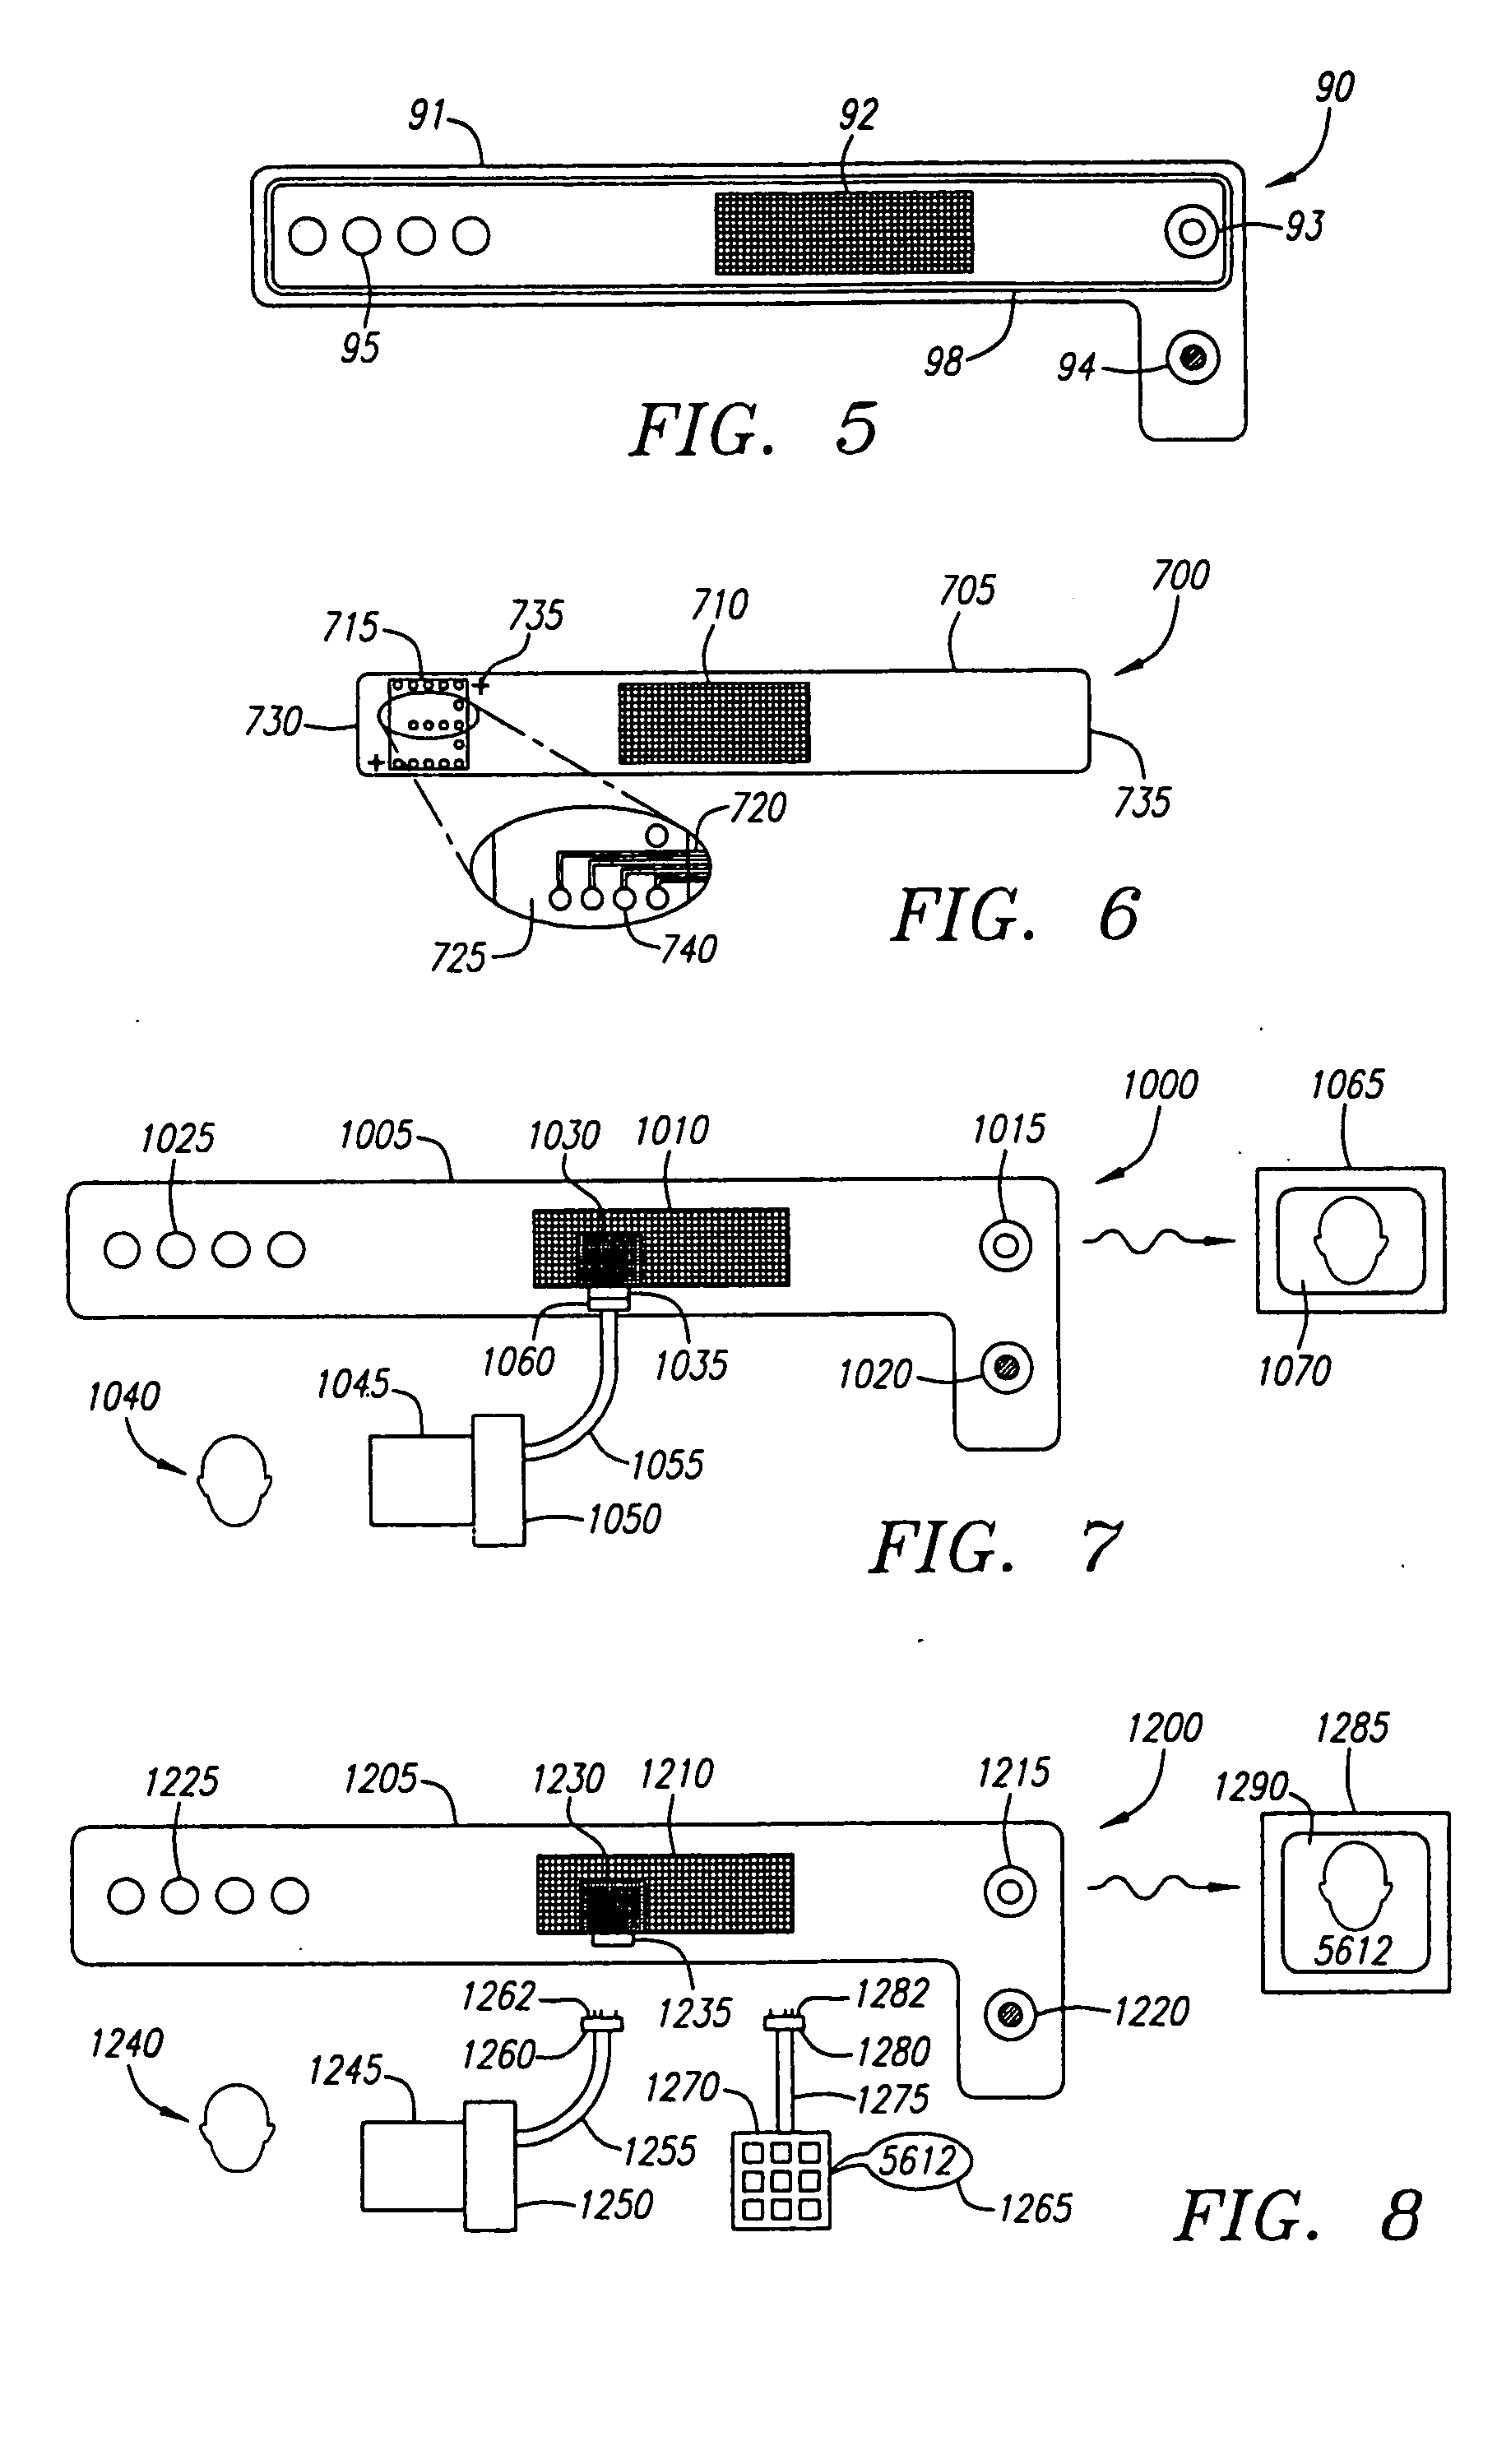 Enhanced identification appliance having a plurality or data sets for authentication